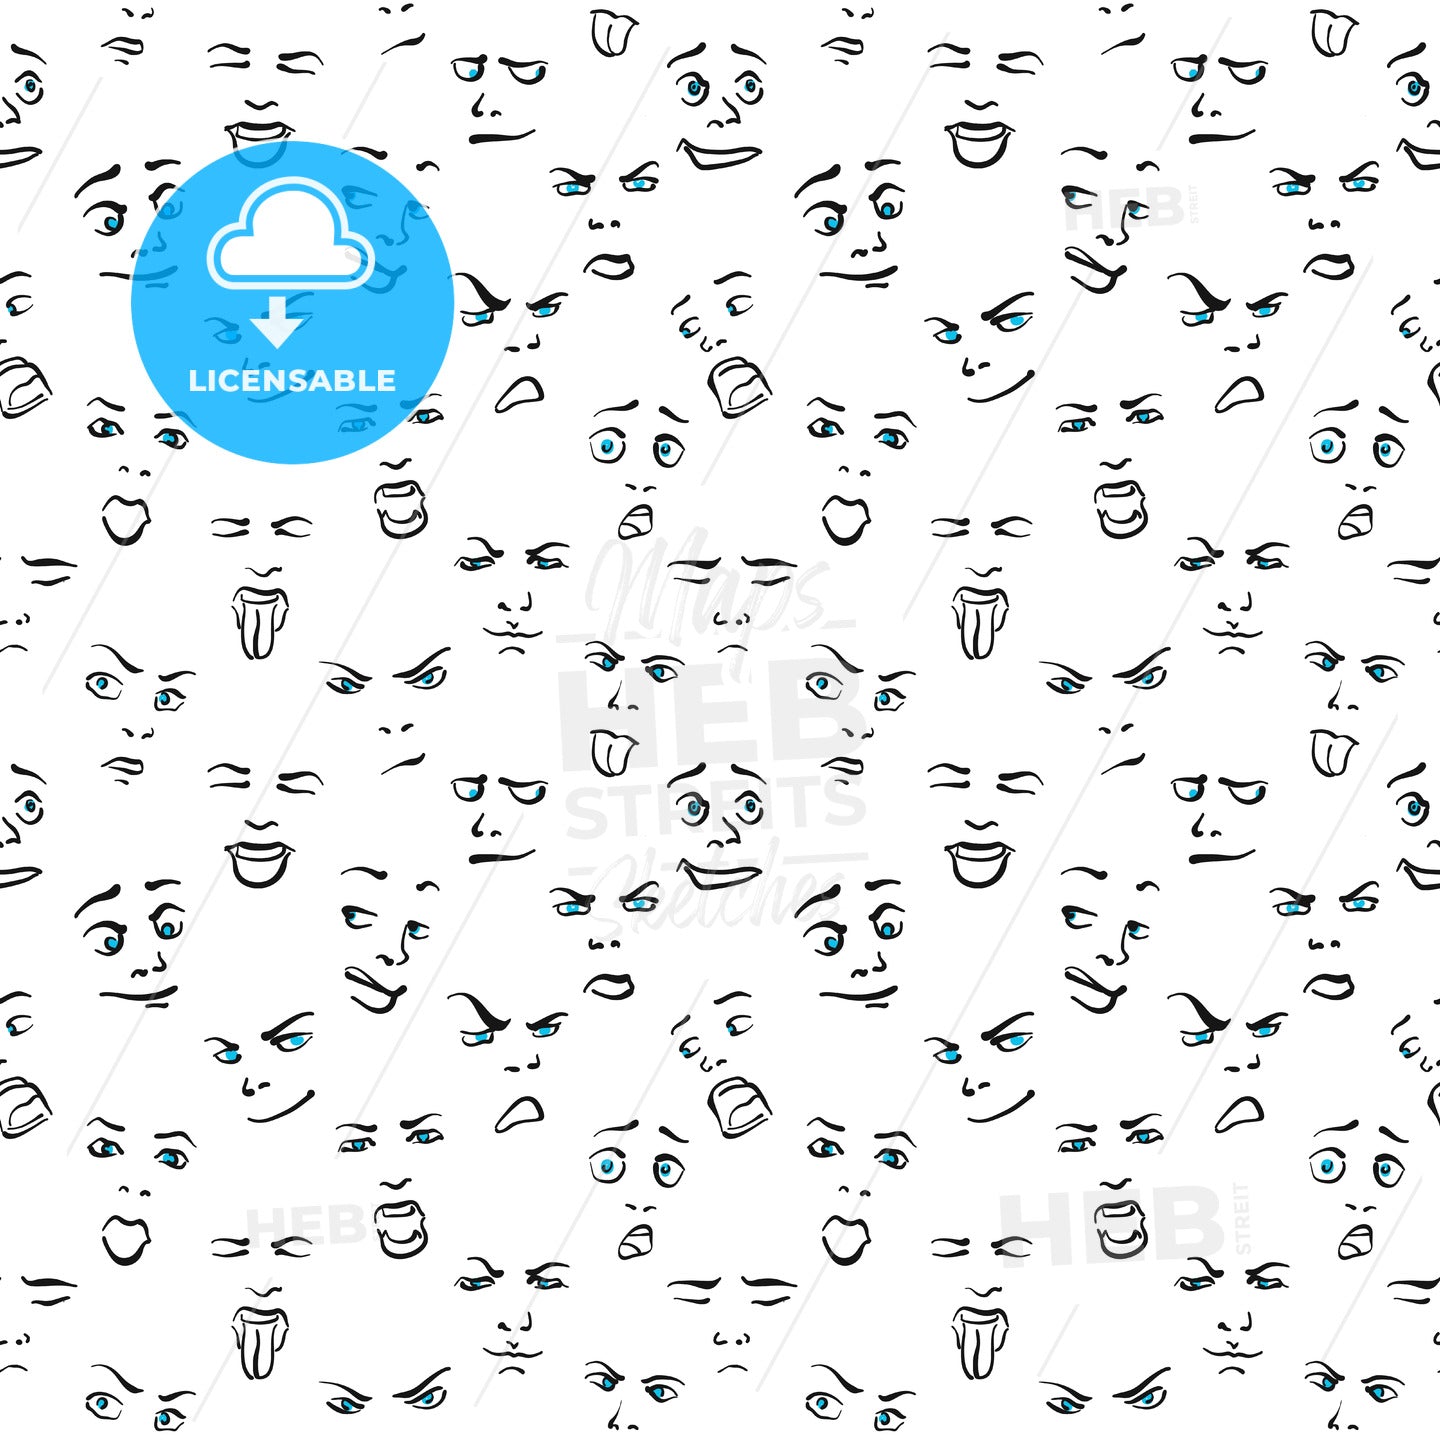 Seamless Set of Faces - Wallpaper Design – instant download